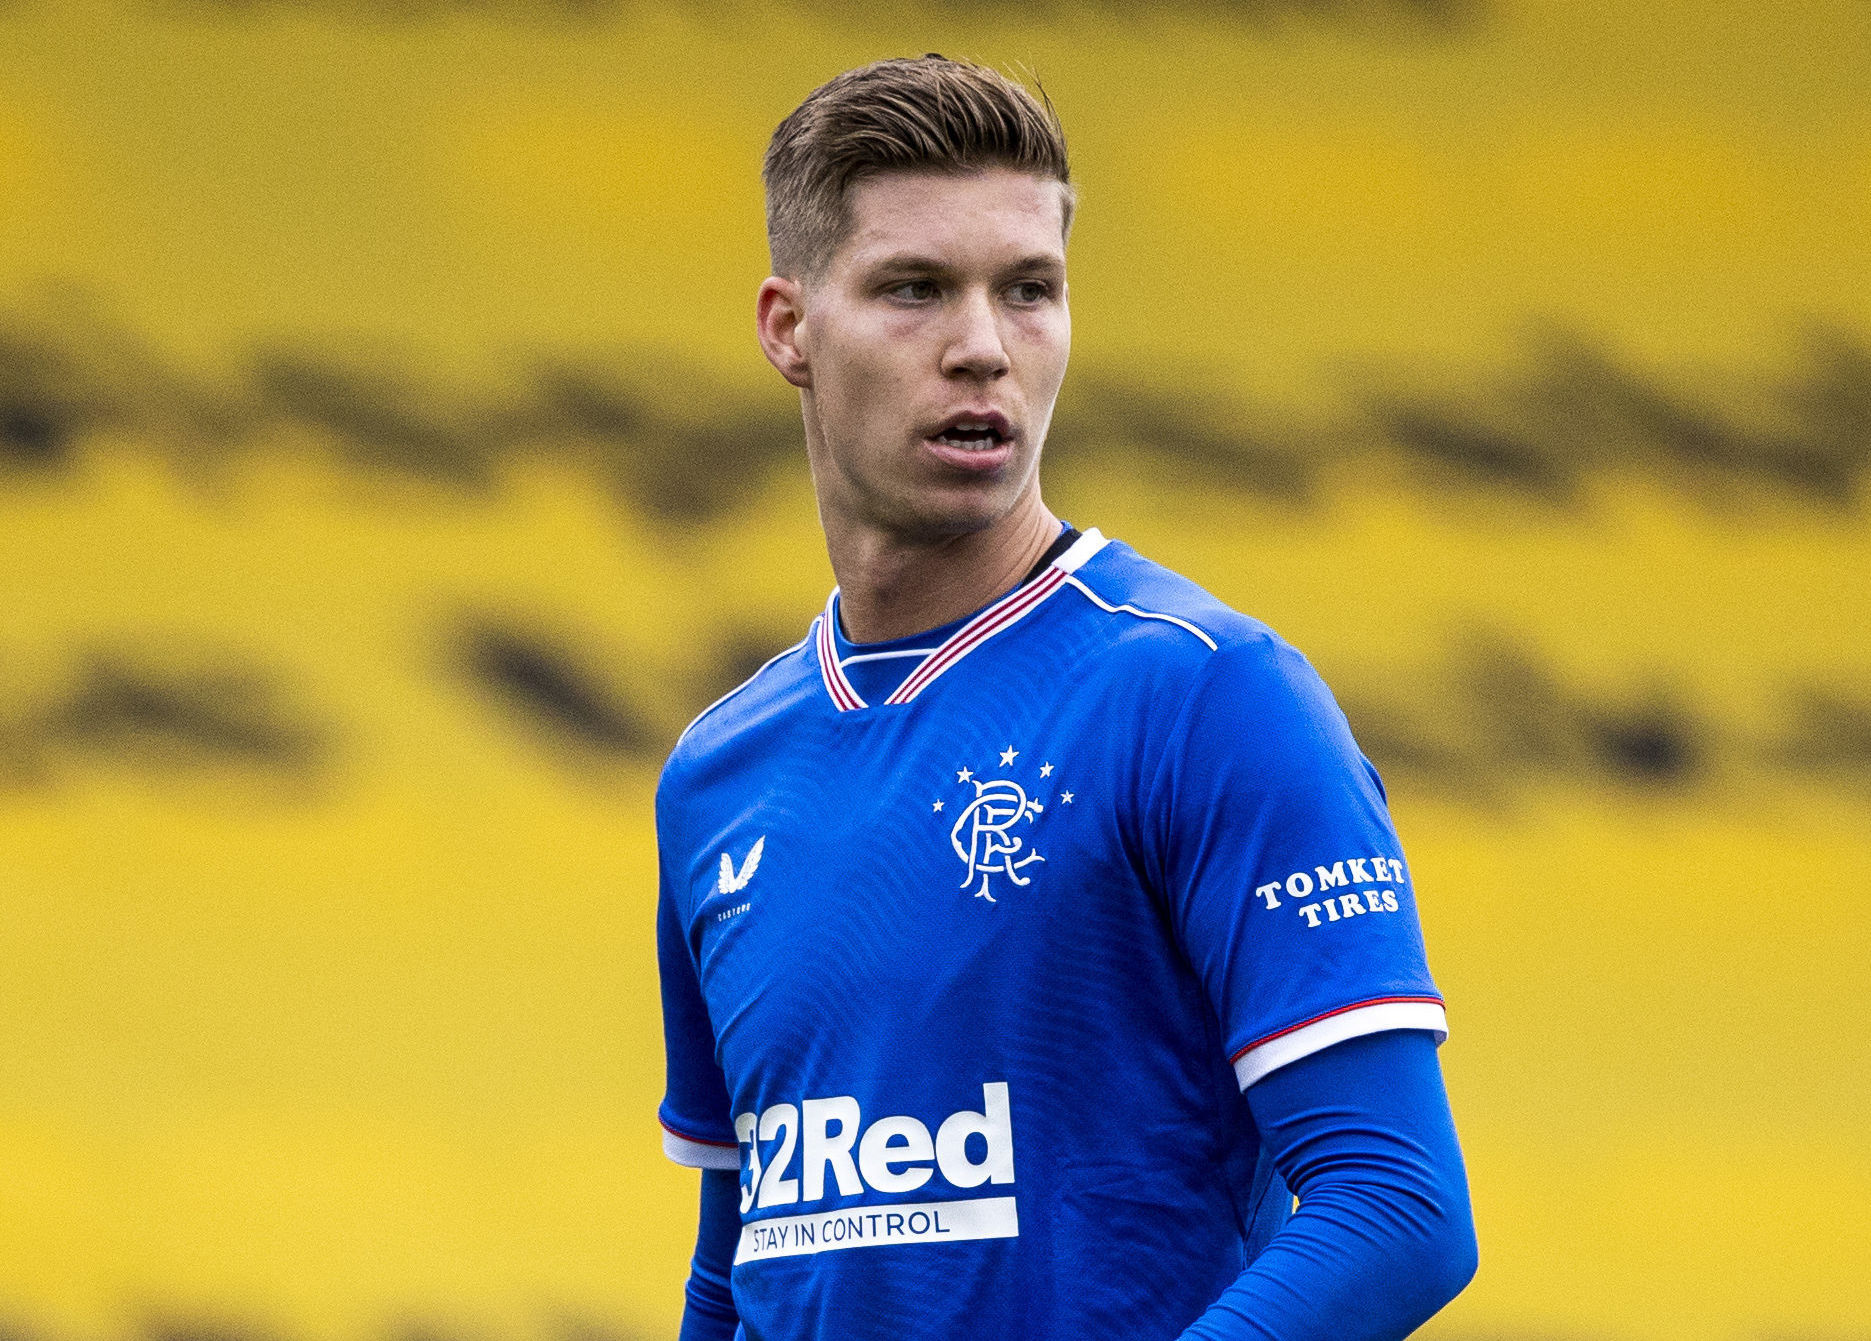 Rangers Cedric Itten during the Scottish Premiership match at the Tony Macaroni Arena, Livingston. PA Photo. Picture date: Sunday August 16, 2020. See PA story SOCCER Livingston. Photo credit should read: